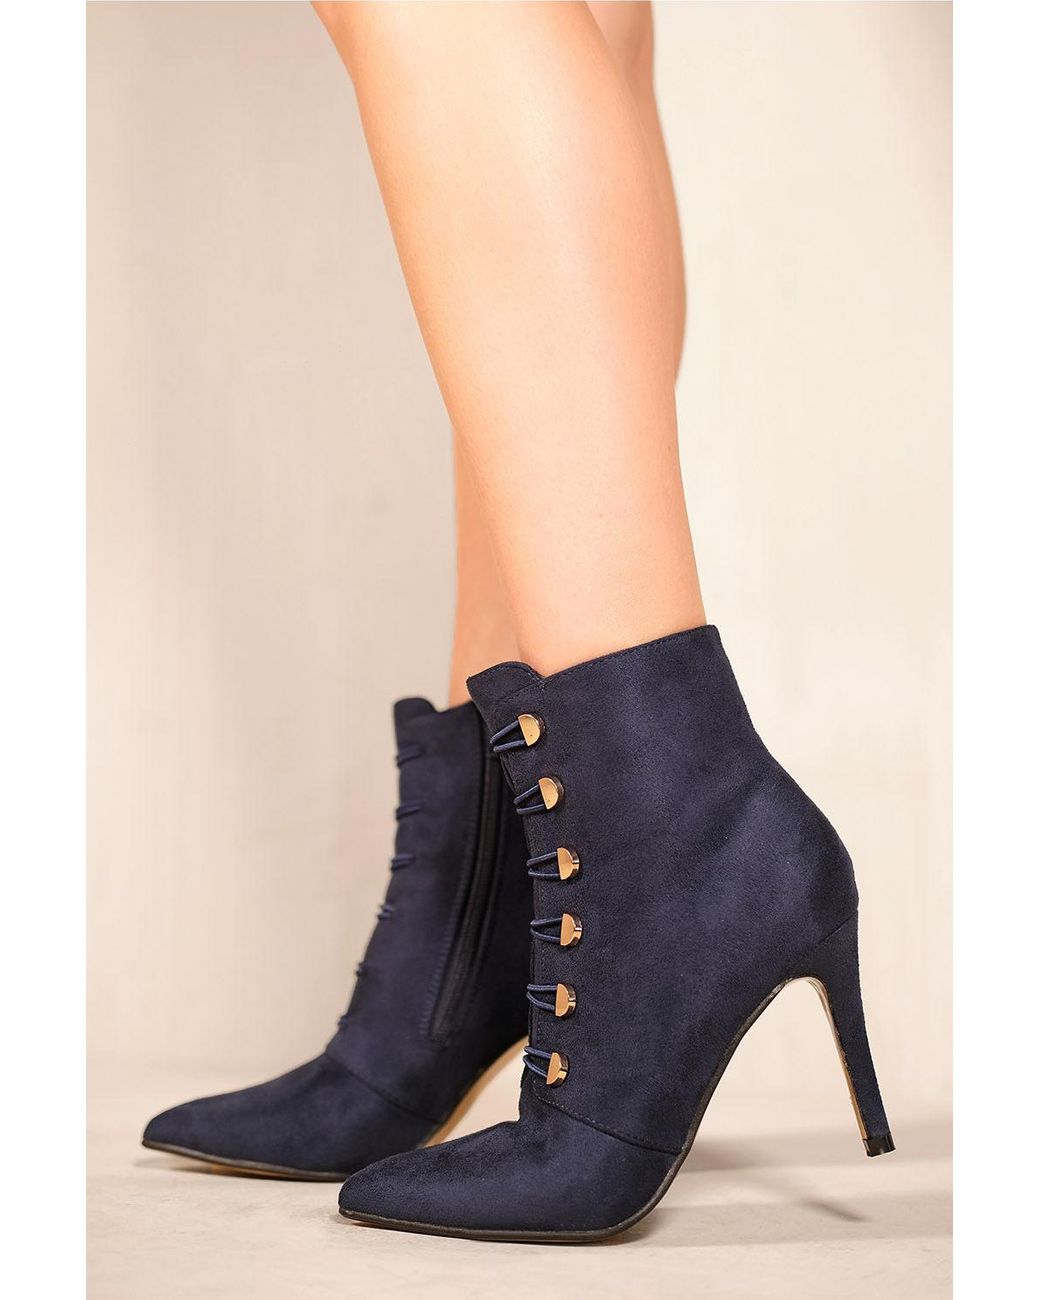 Where's That From Blythe Pointed Toe Mid Heel Ankle Boots in Blue | Lyst